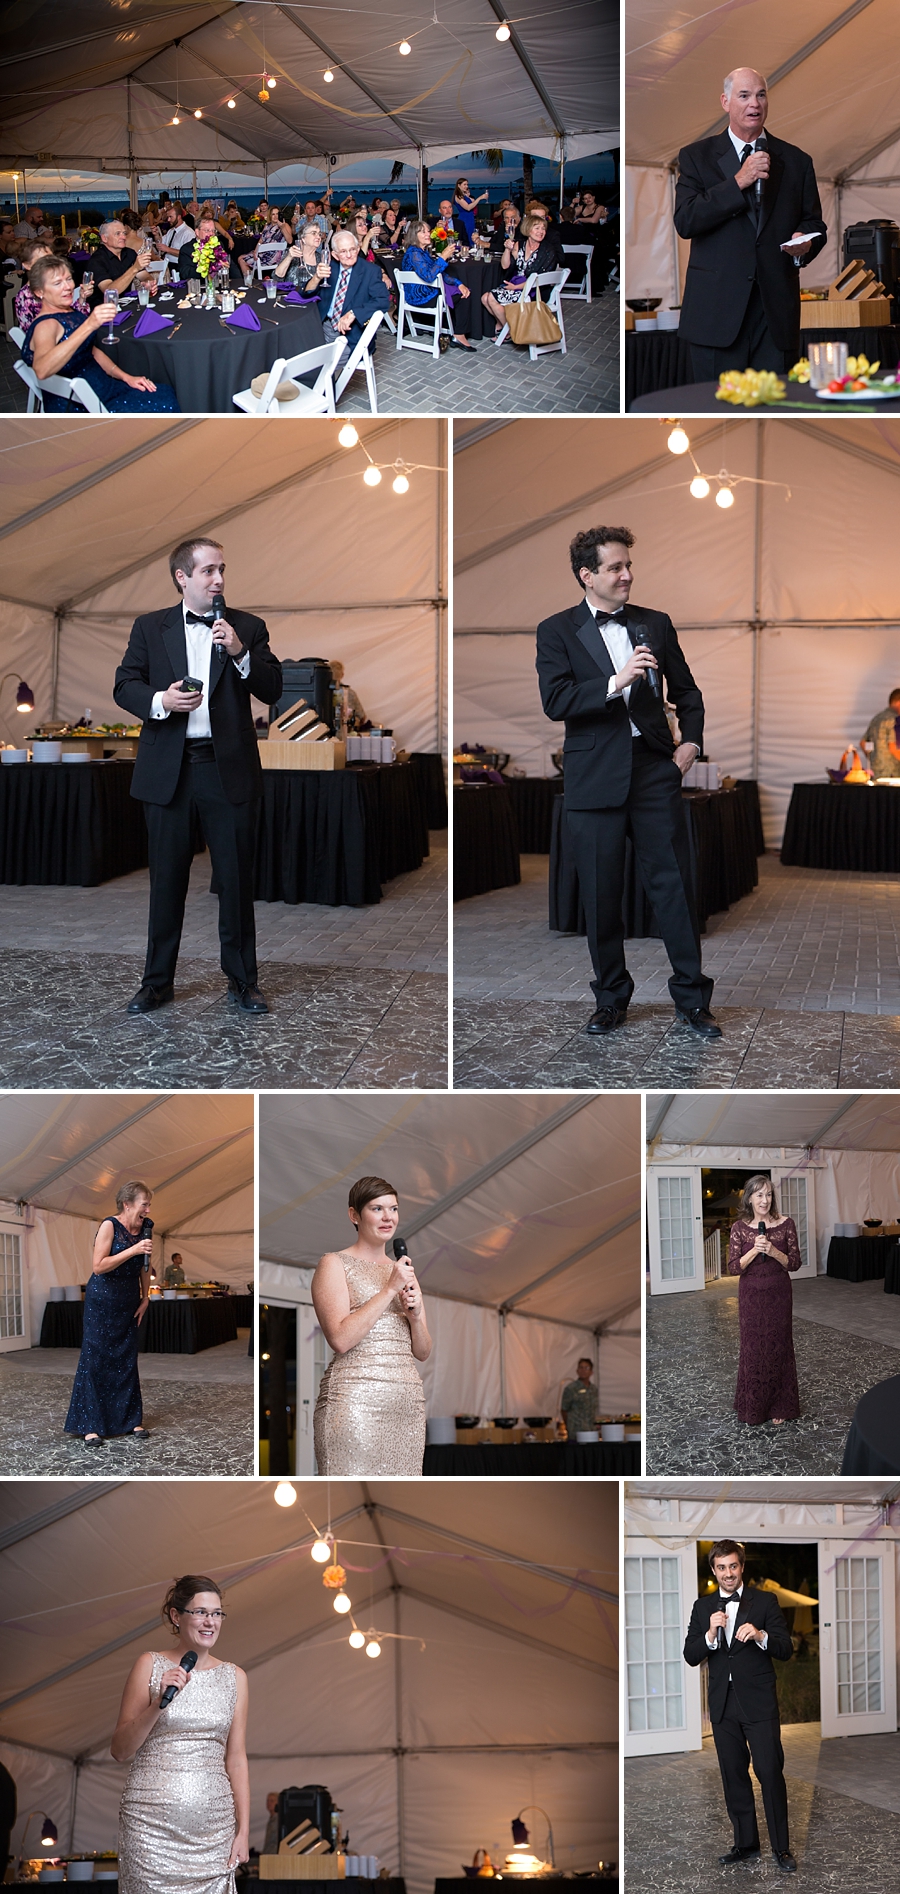 speeches at the wedding reception